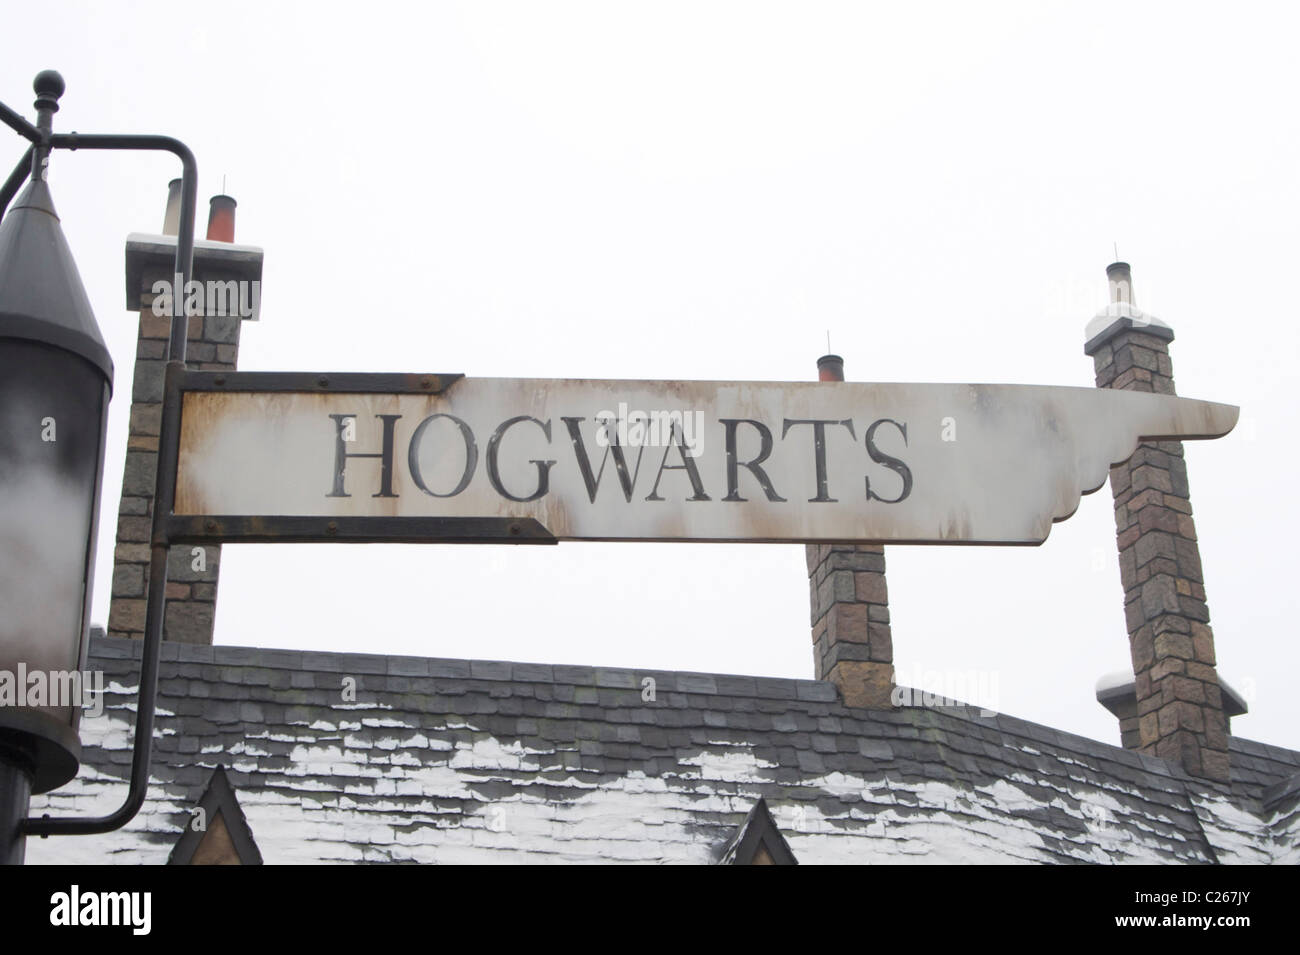 Hogwarts sign post at the Wizarding World of Harry Potter Stock Photo